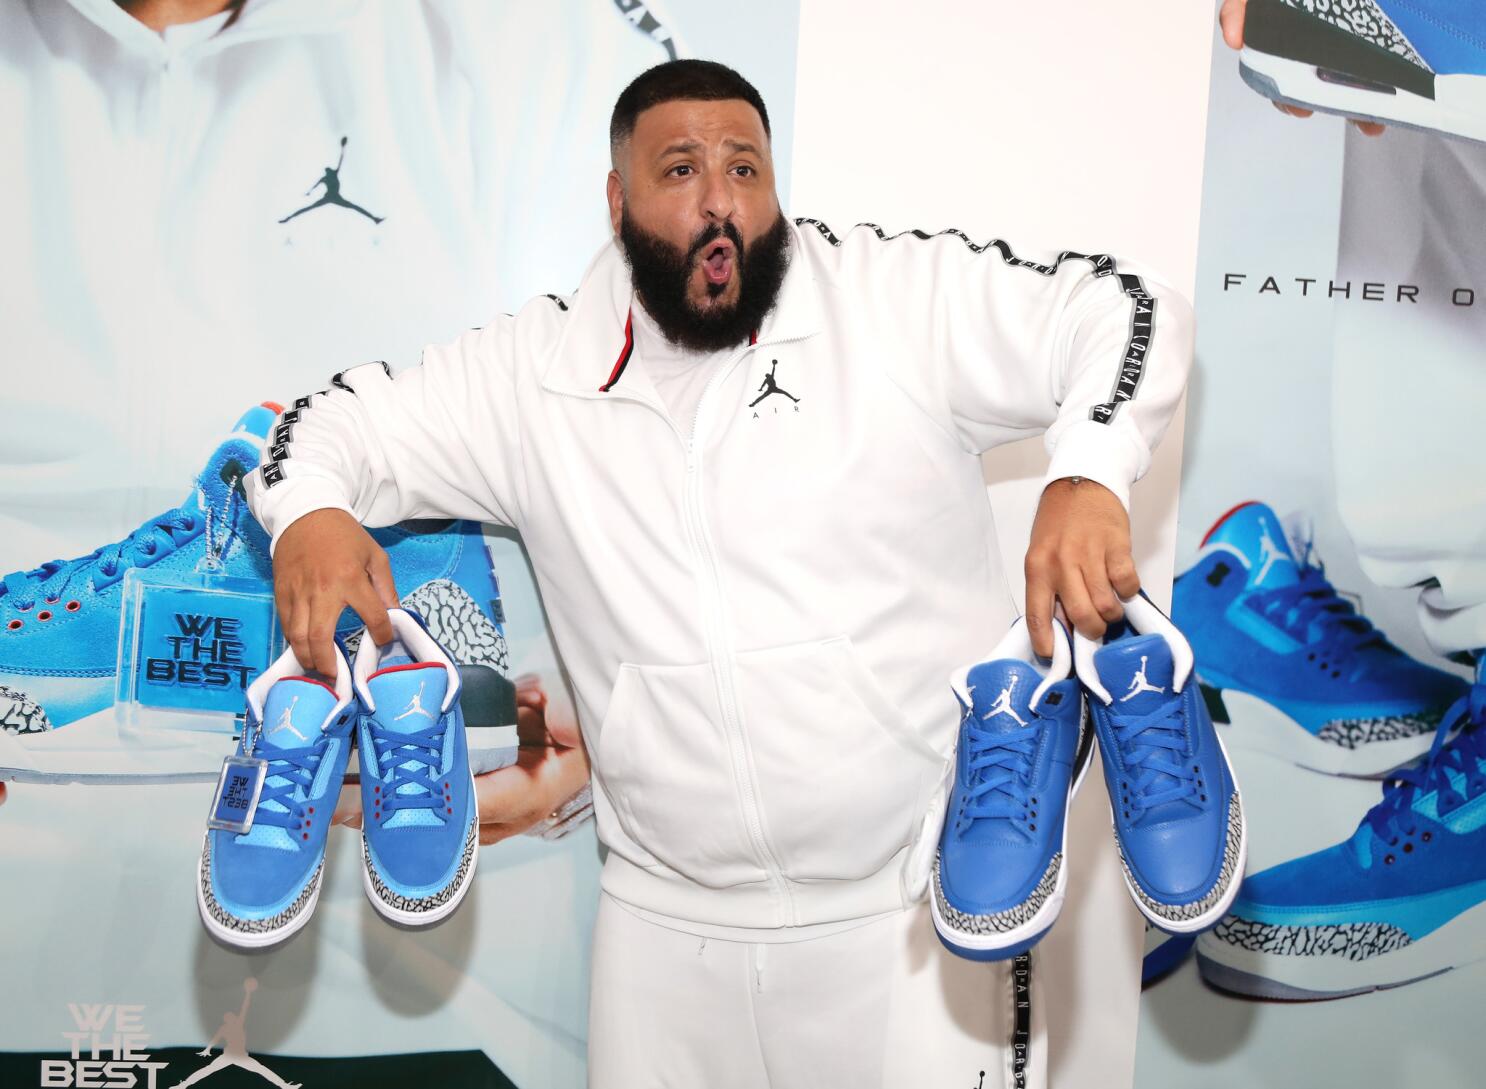 DJ Khaled opens up about Jay-Z and Beyoncé, his son Asahd and his